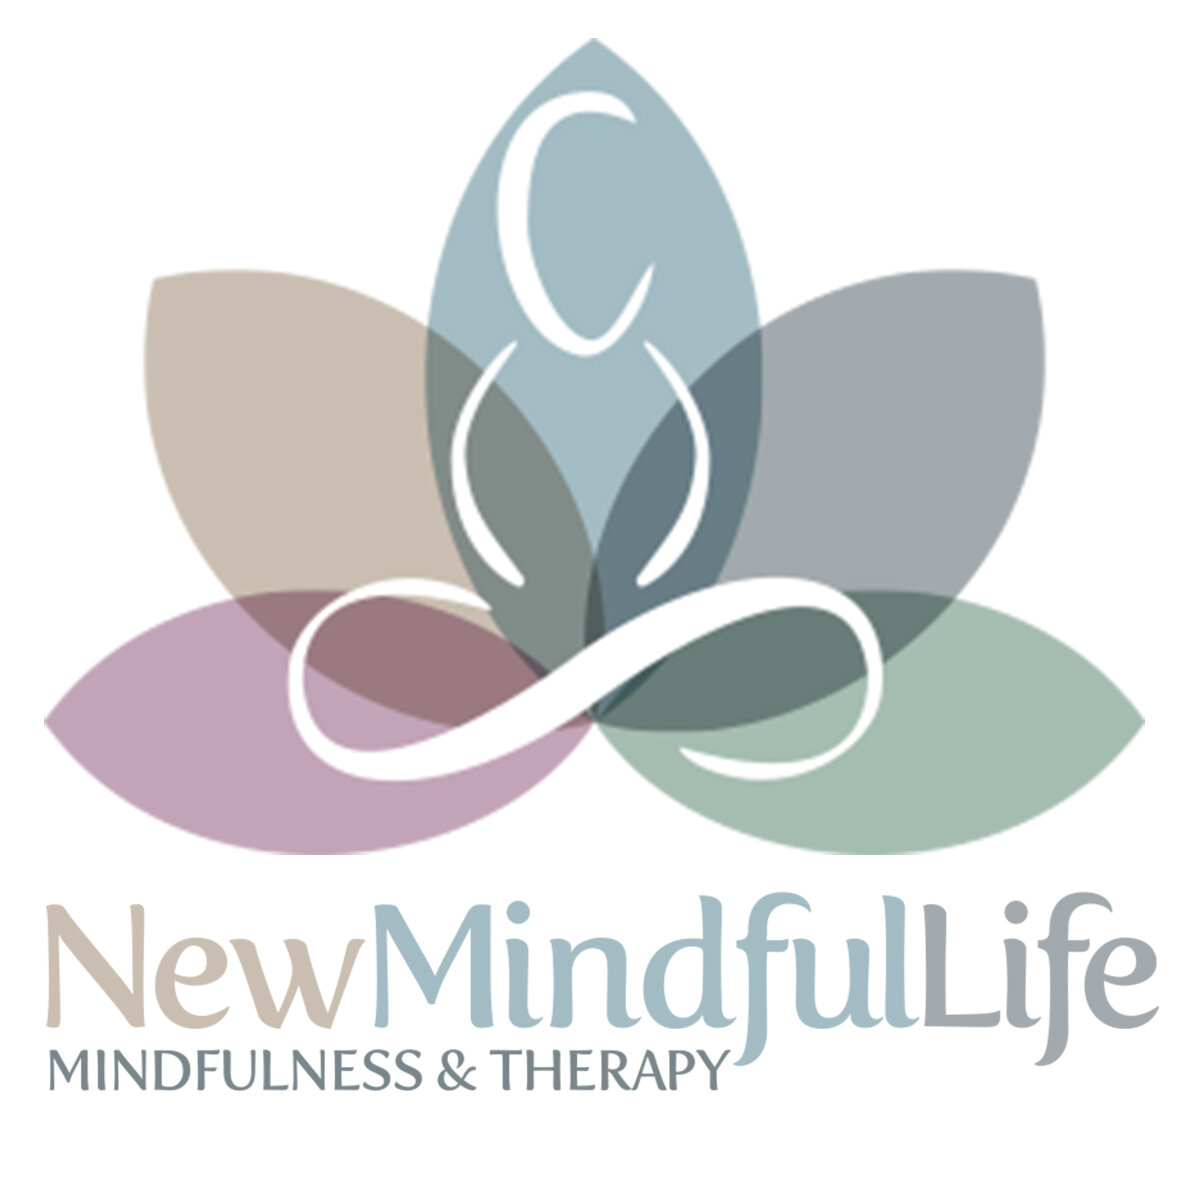 Mindfulness and Therapy